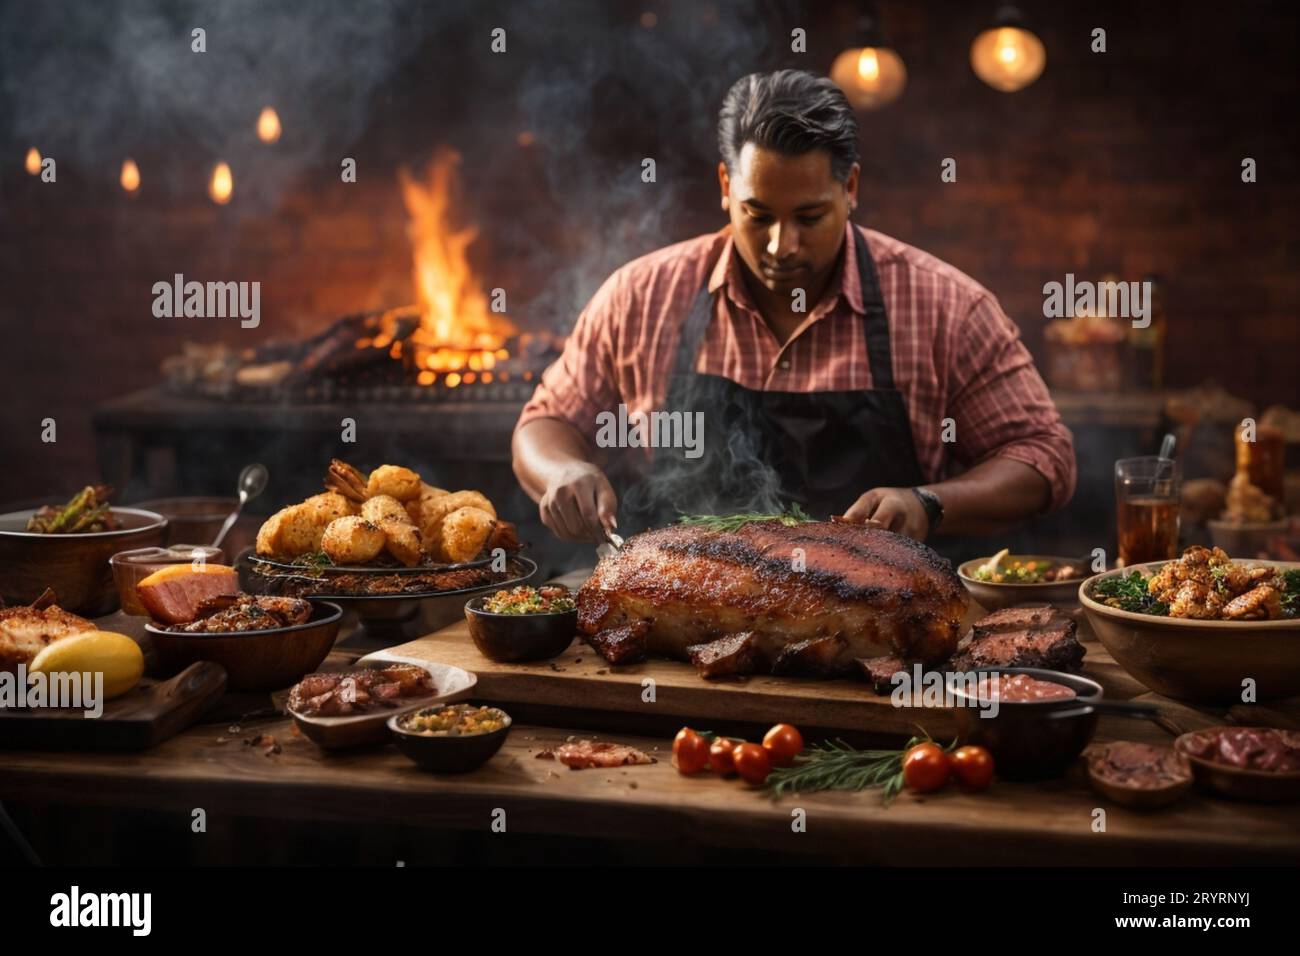 A young man grilling a selection of meats and fresh vegetables on a barbecue Stock Photo